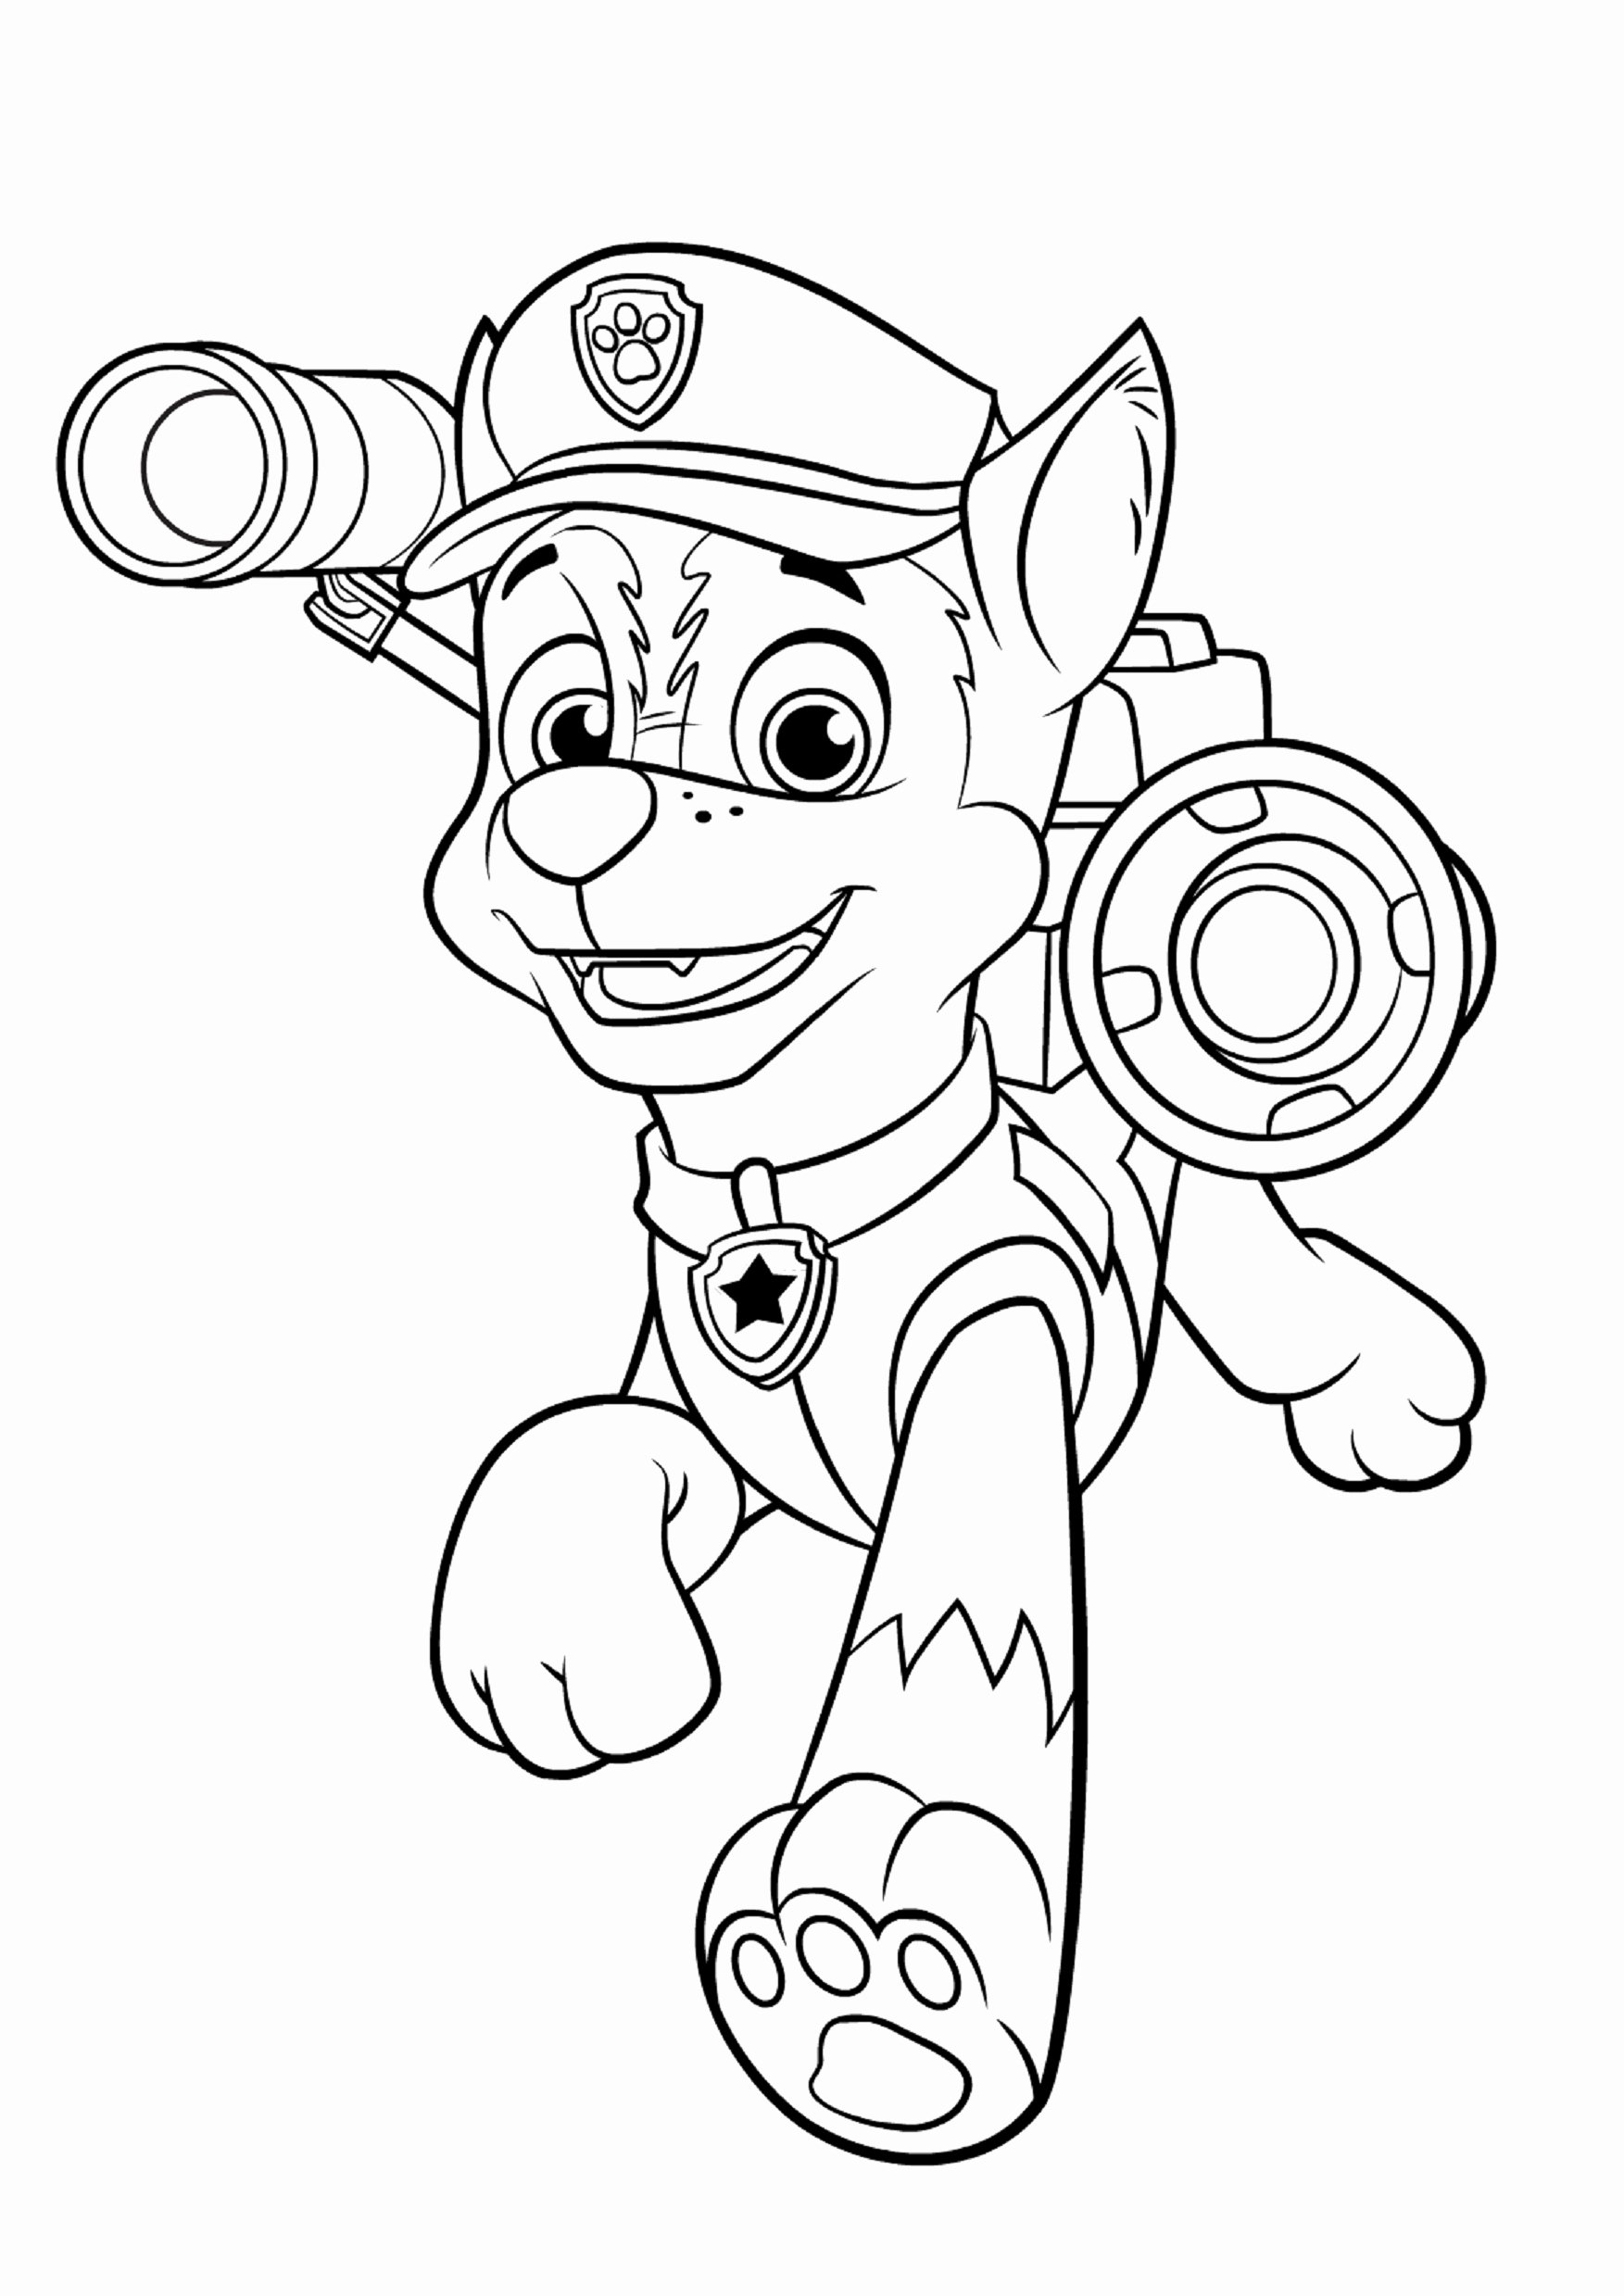 Paw Patrol Coloring Page New Chase Paw Patrol Coloring Pages to ...